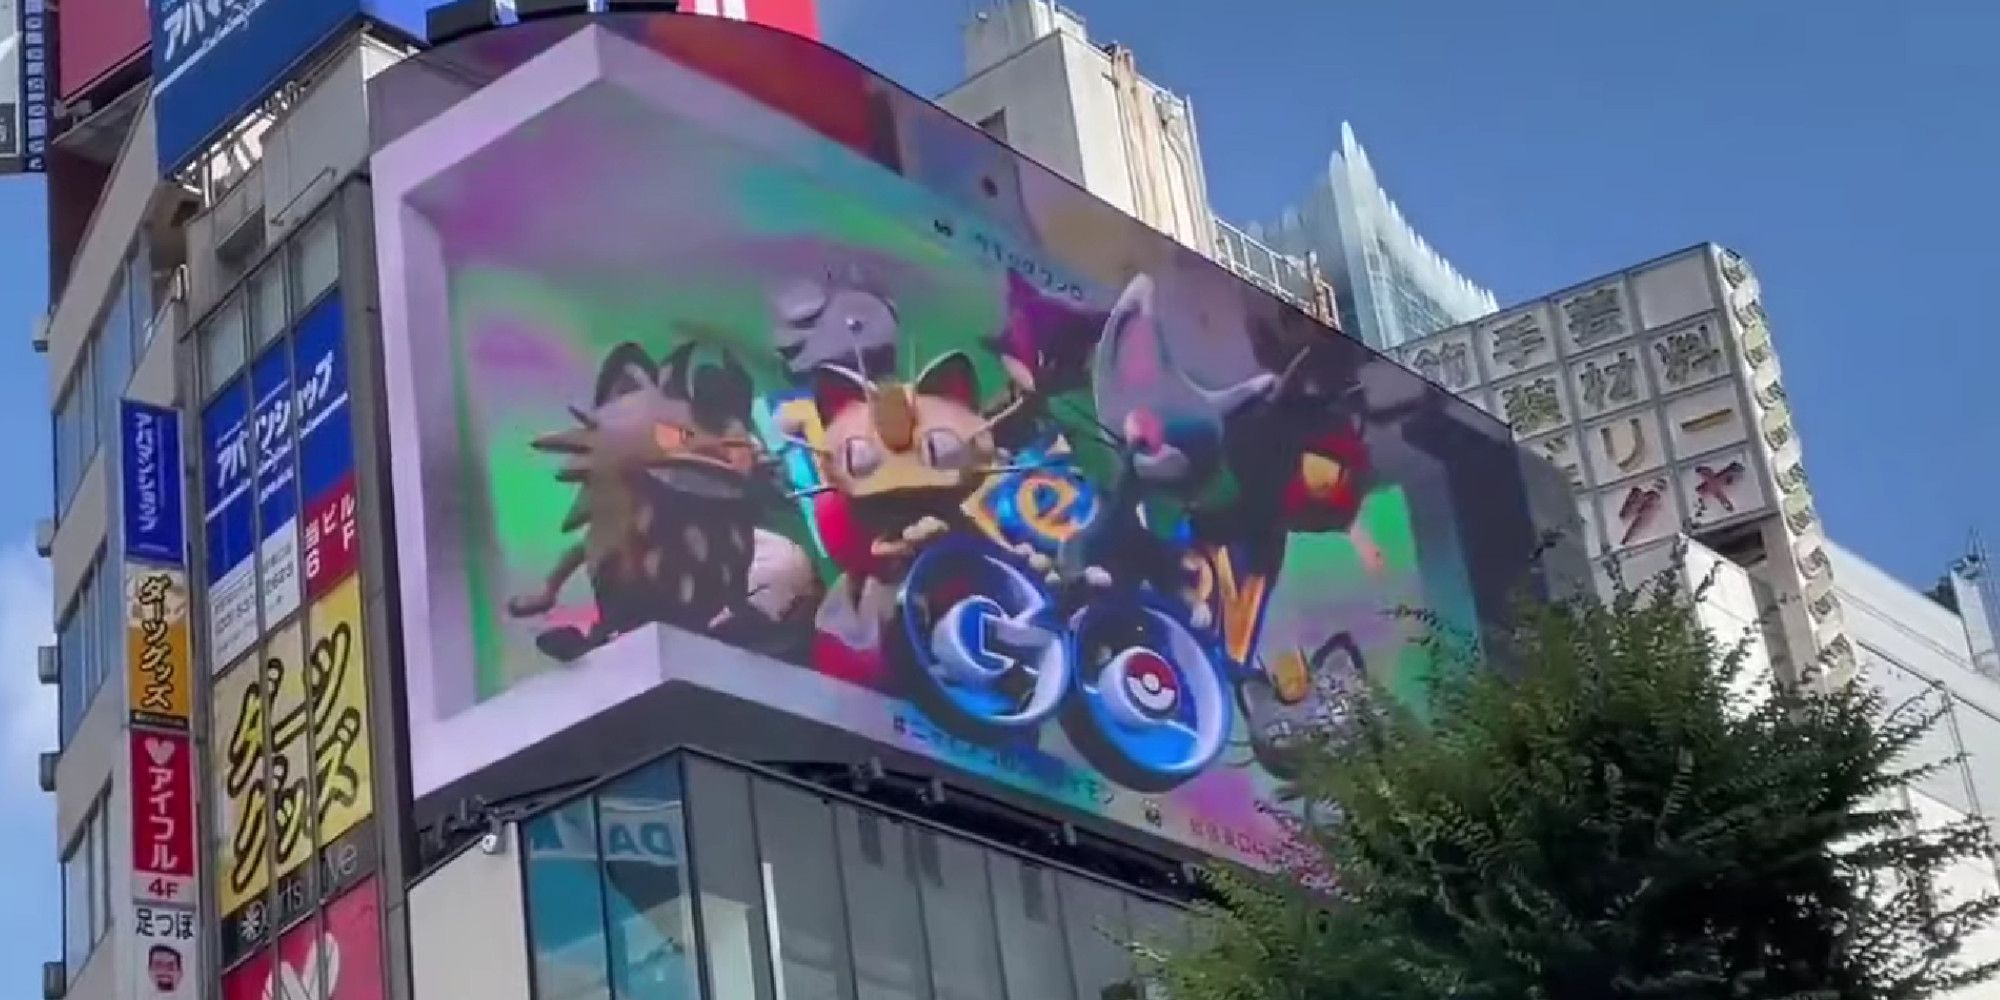 Nintendo Brings Pokemon Go To Life With 3D Billboards In Japan